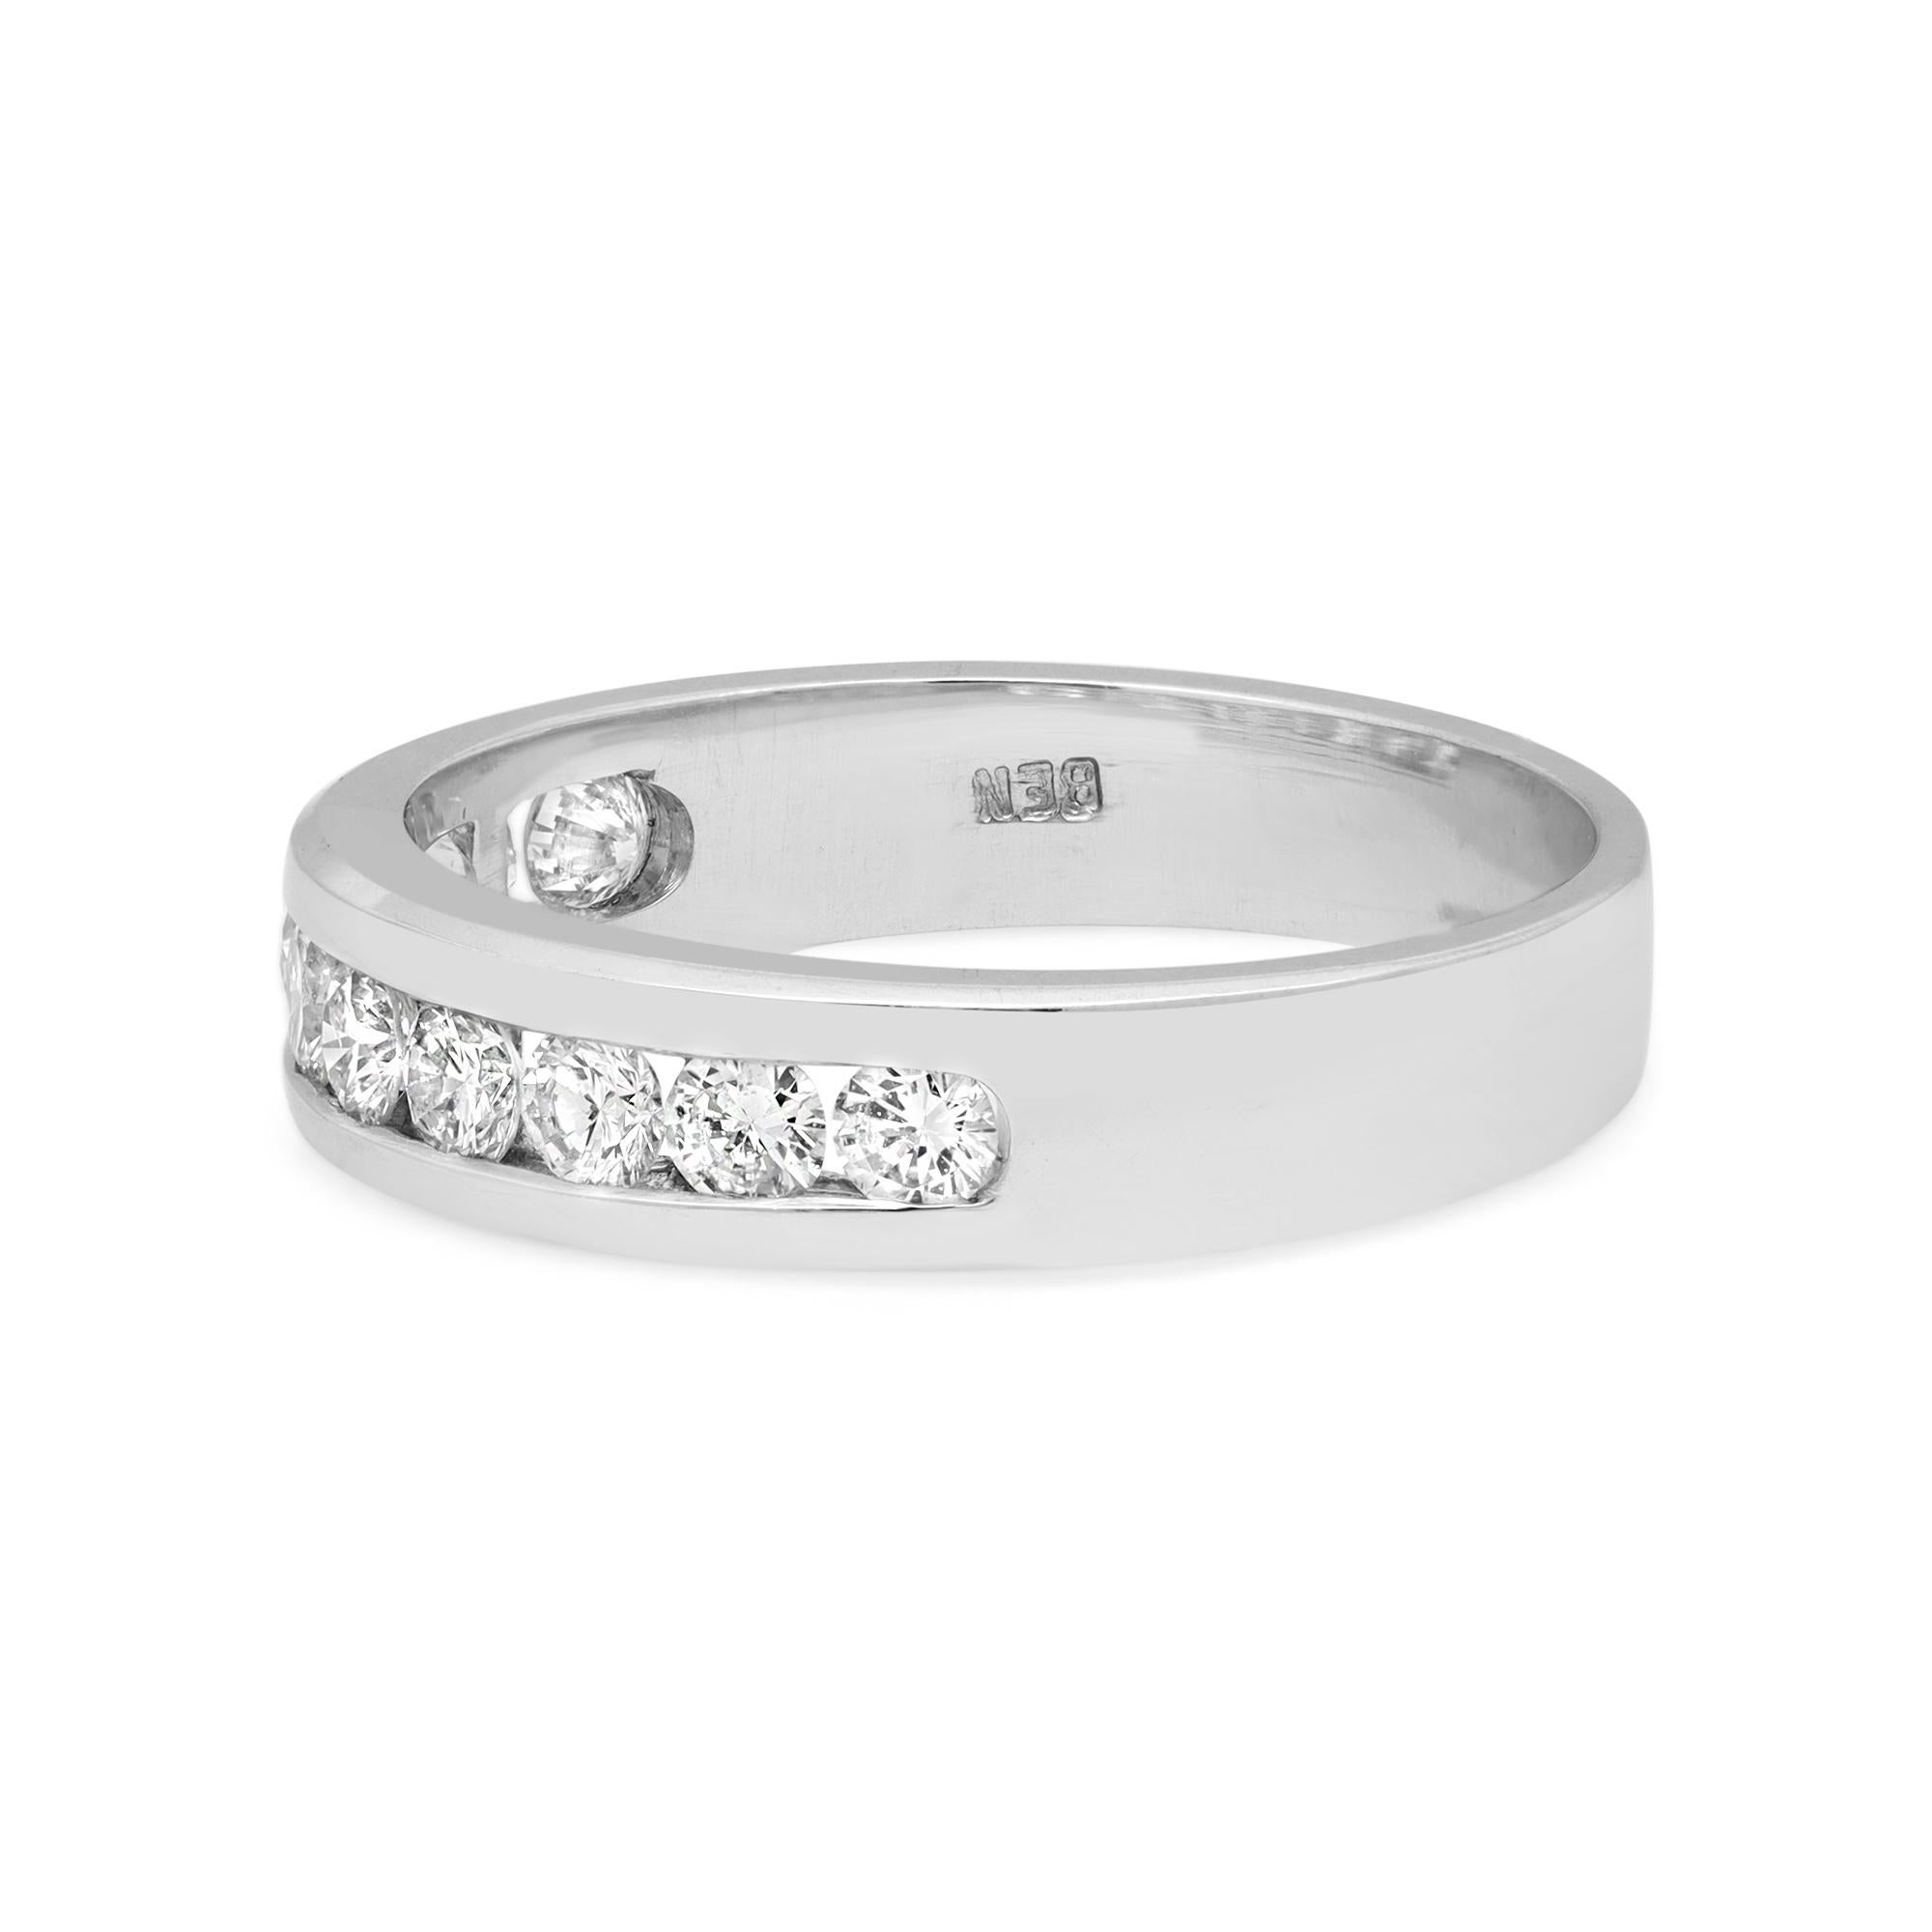 This classic women's band ring features 10 round brilliant cut dazzling natural diamonds. All diamonds are channel set in a solid platinum setting. Total carat weight: 0.75. Diamond color G and SI1 clarity. Band width: 4.7 mm. Ring Size 7. Total